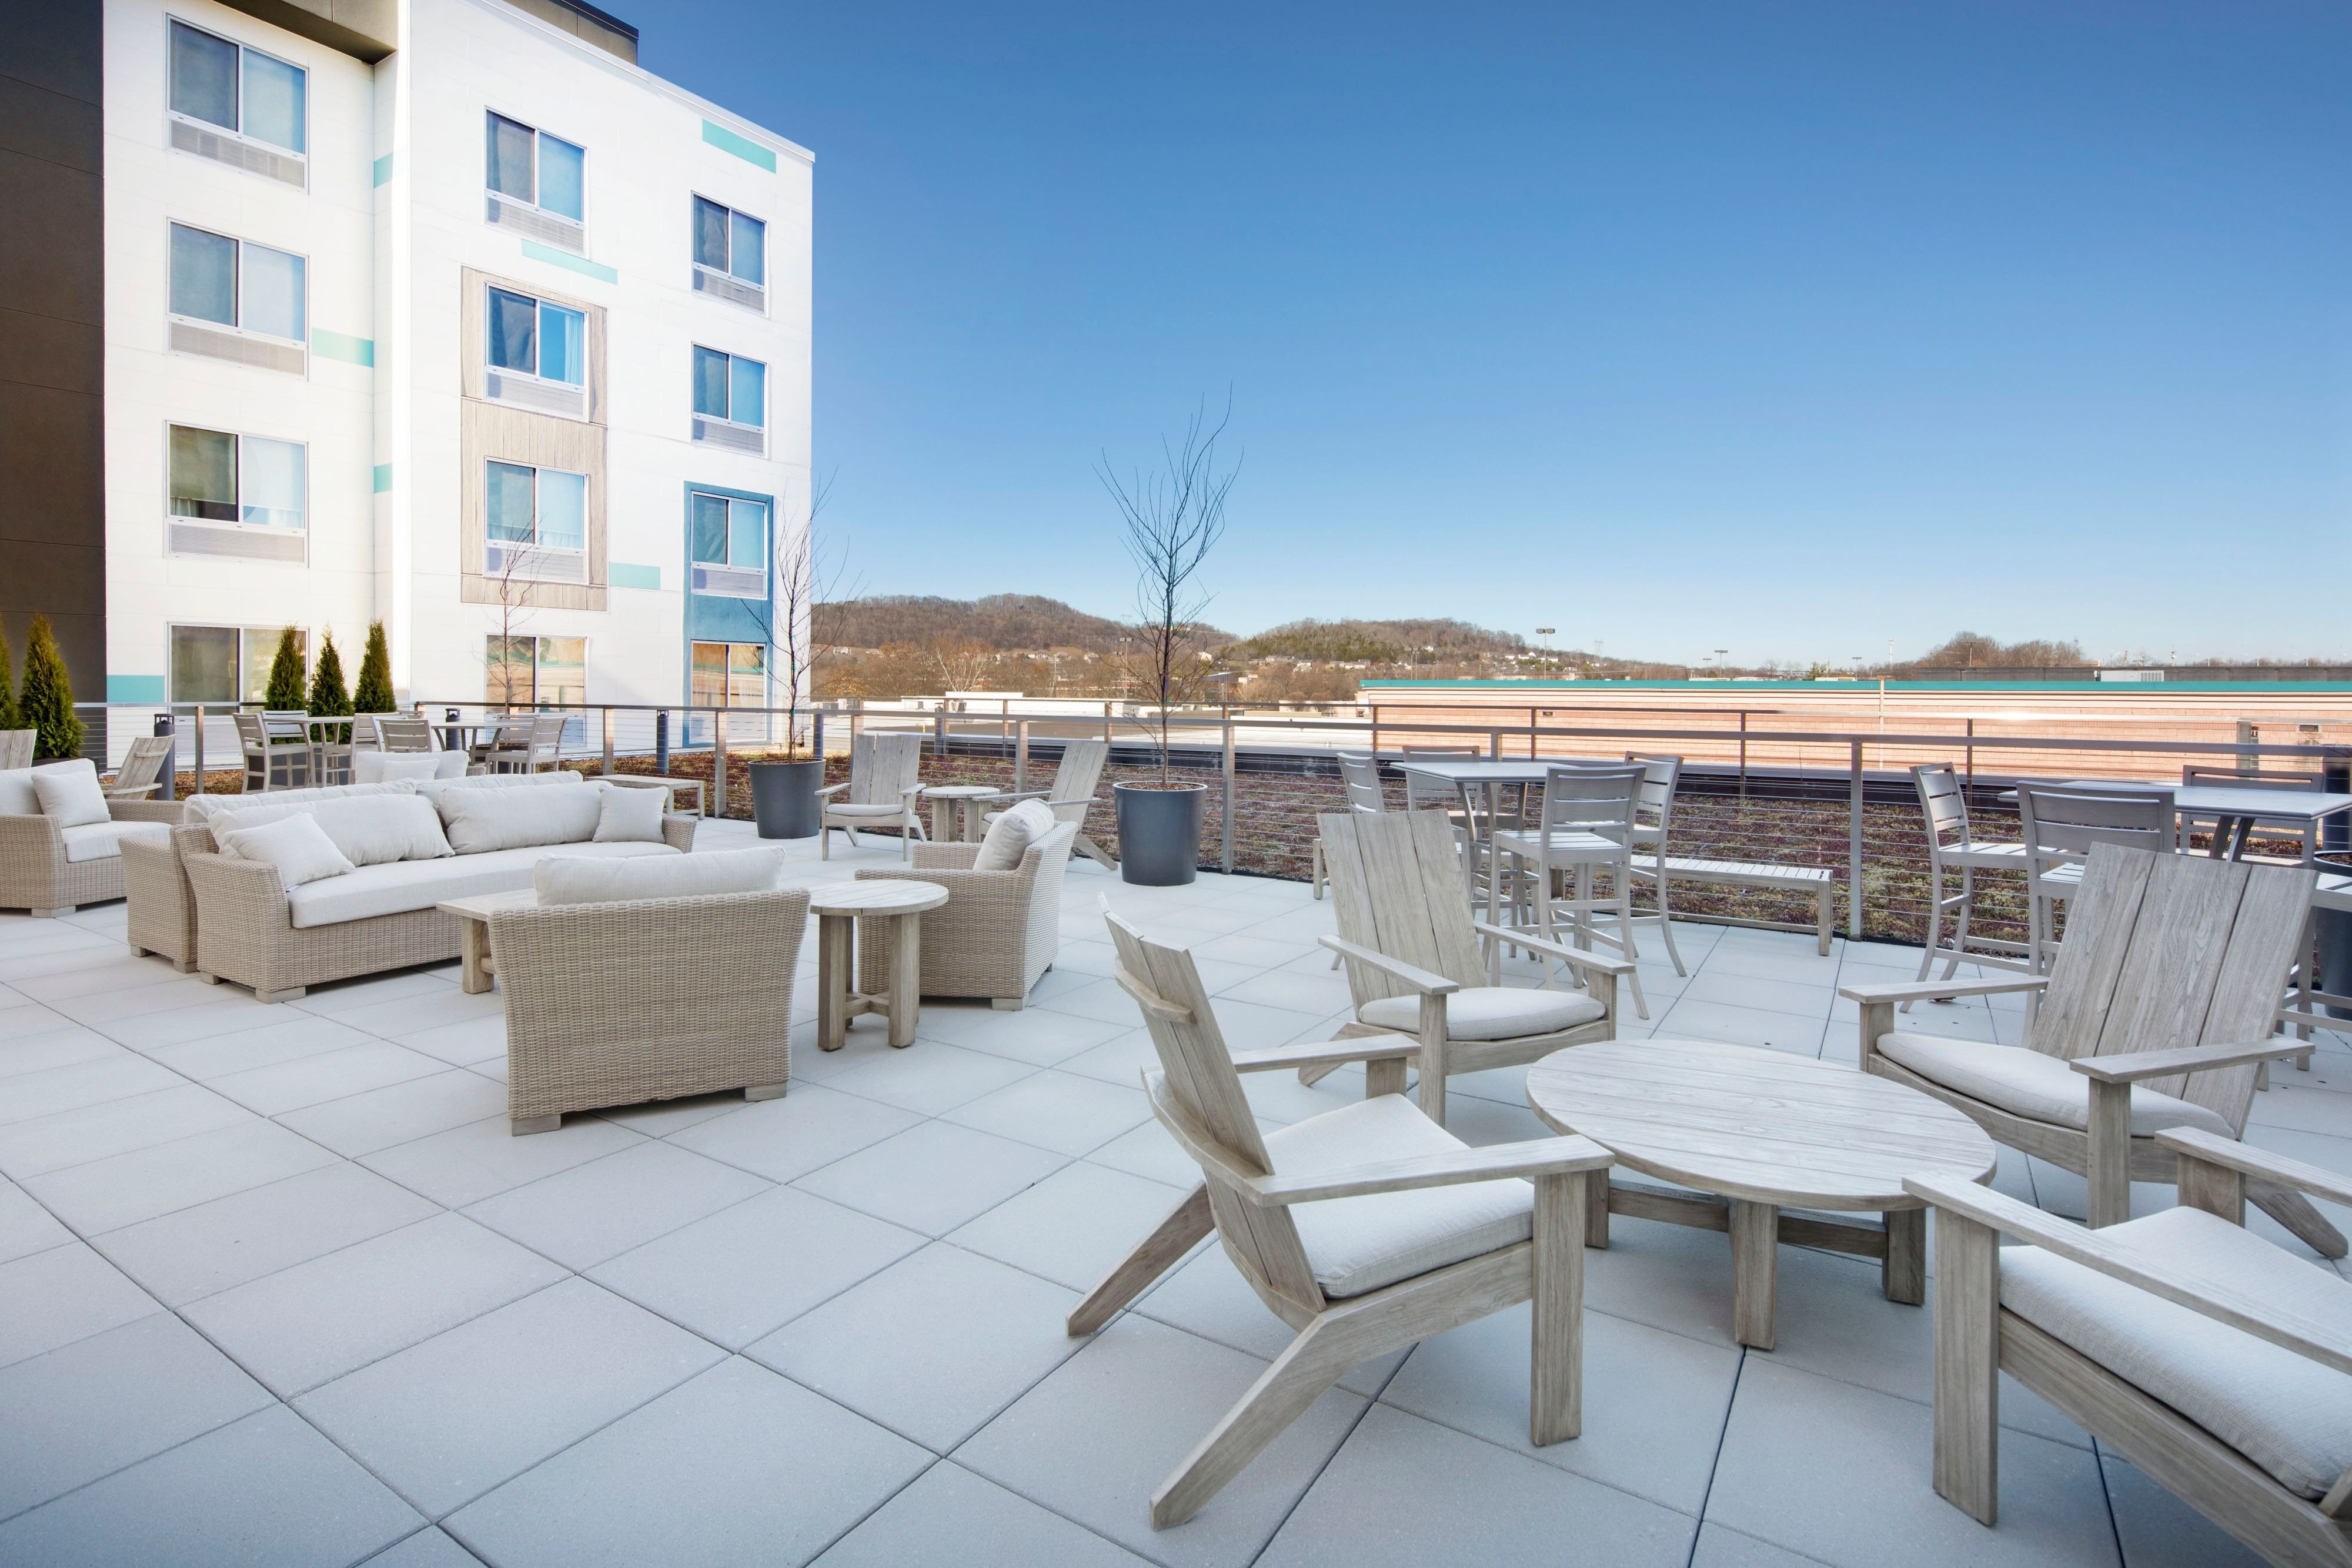 Rooftop Patio Seating Area